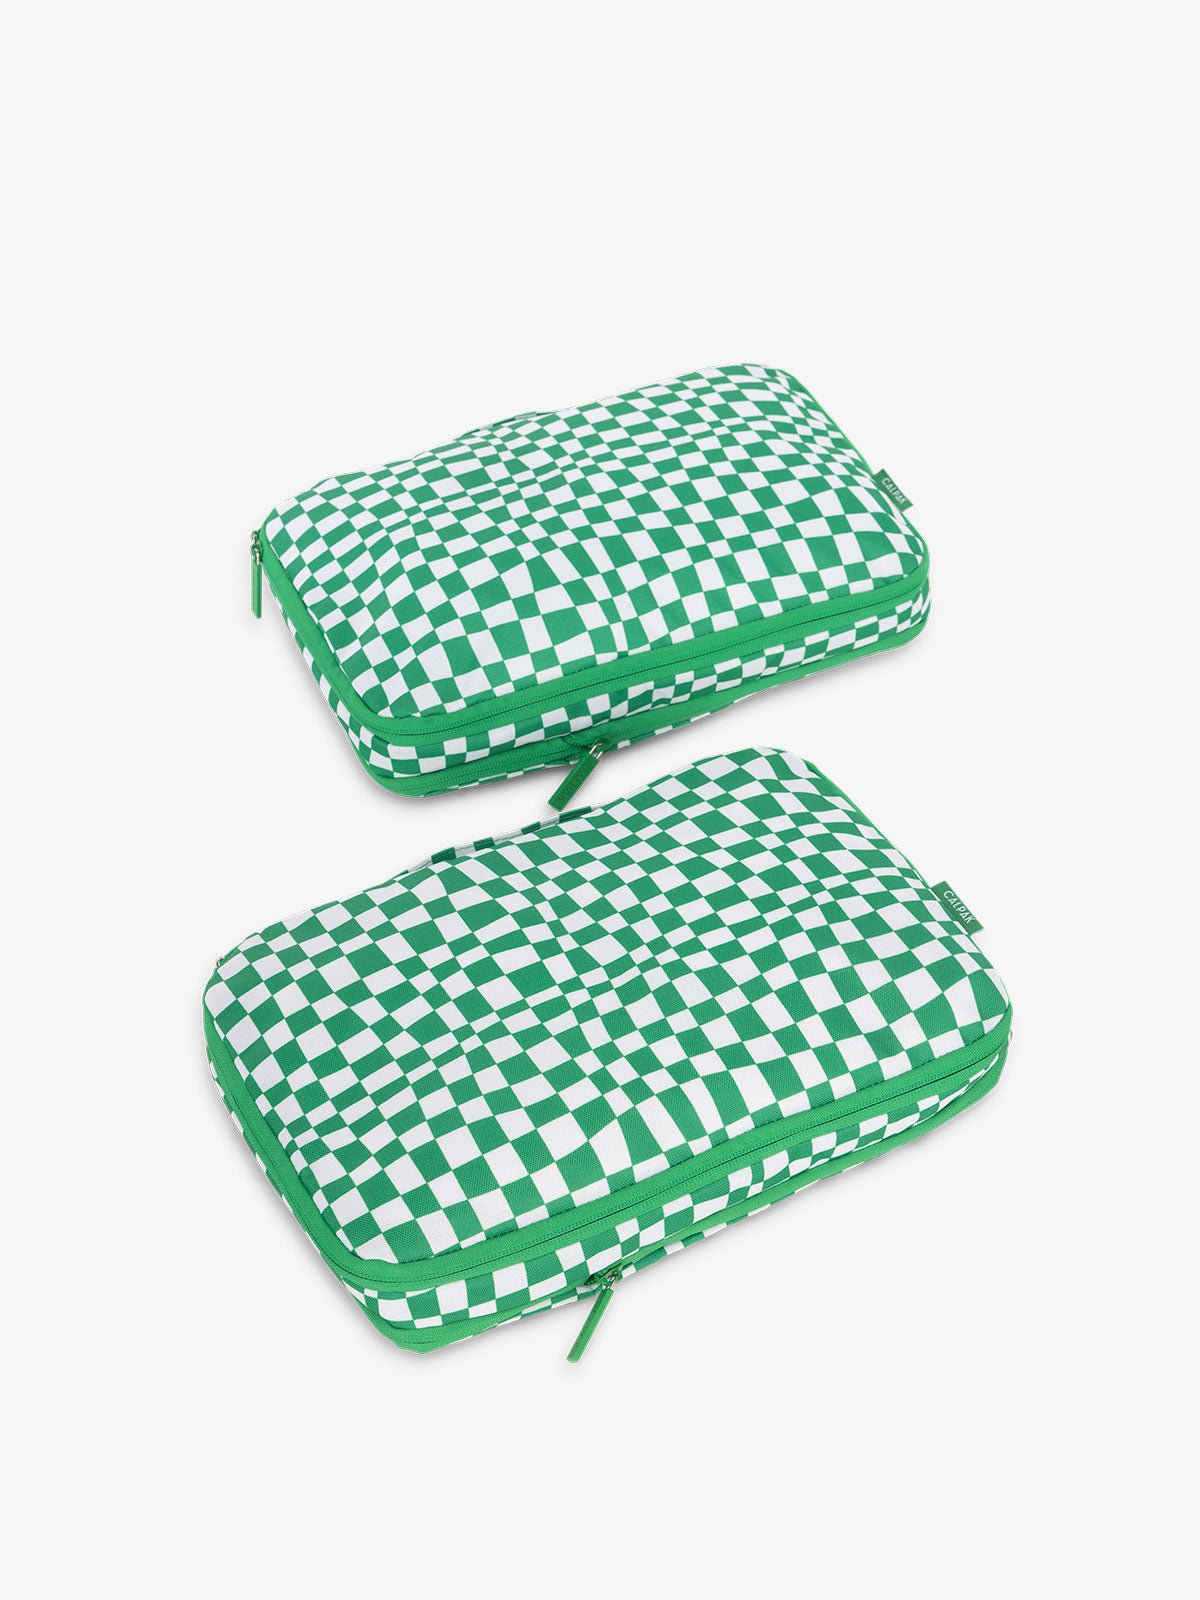 CALPAK compression packing cubes in green checkerboard